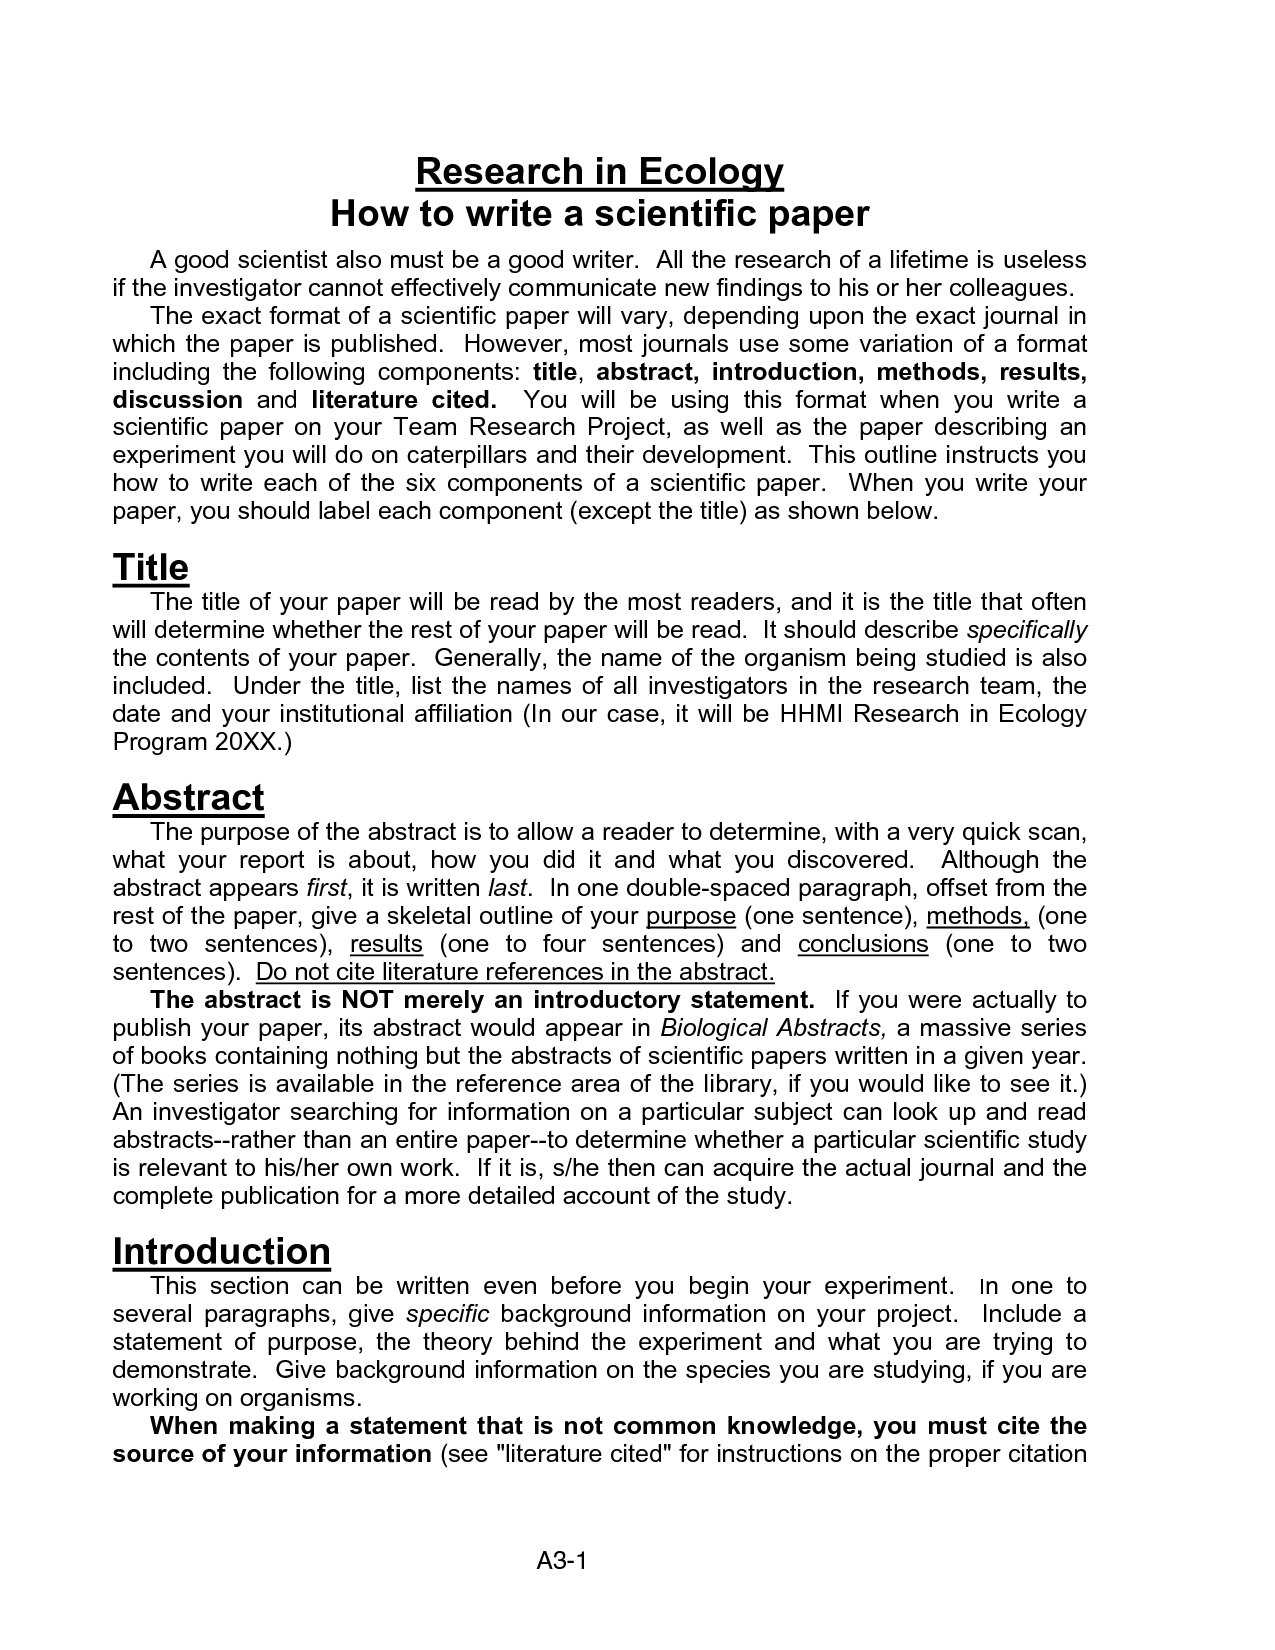 how to write a scientific review paper example